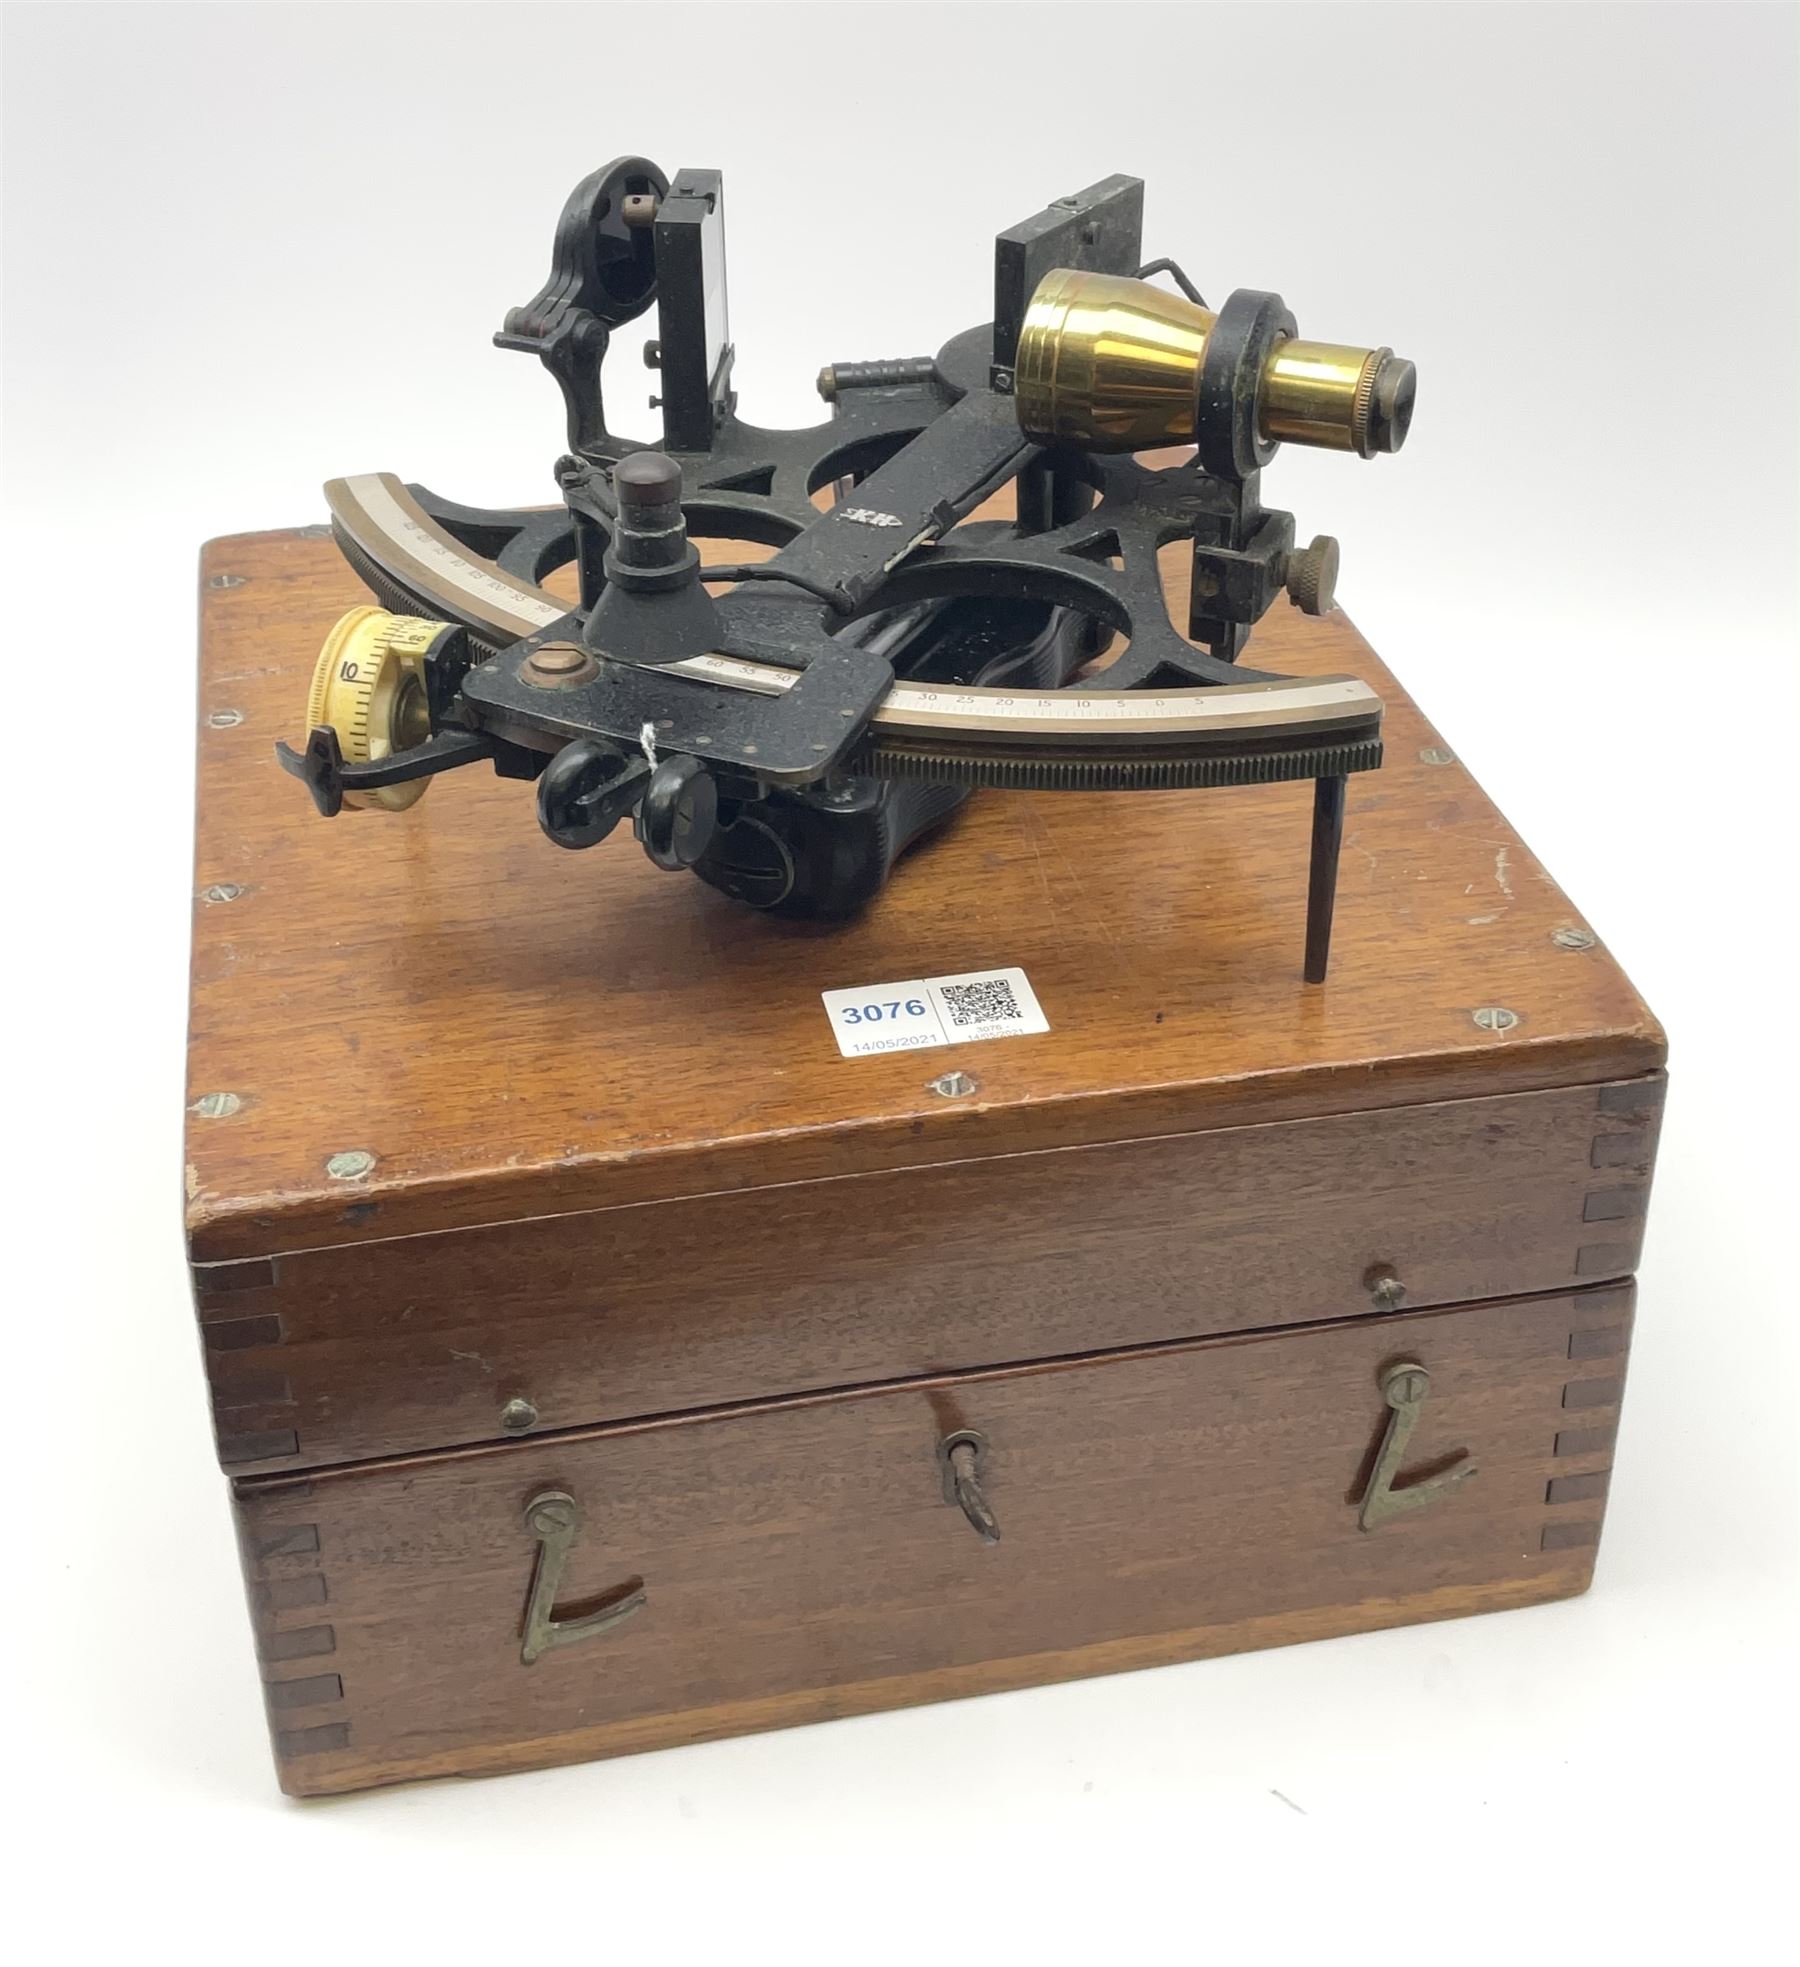 Henry Hughes & Son Ltd. sextant with black crackled finish